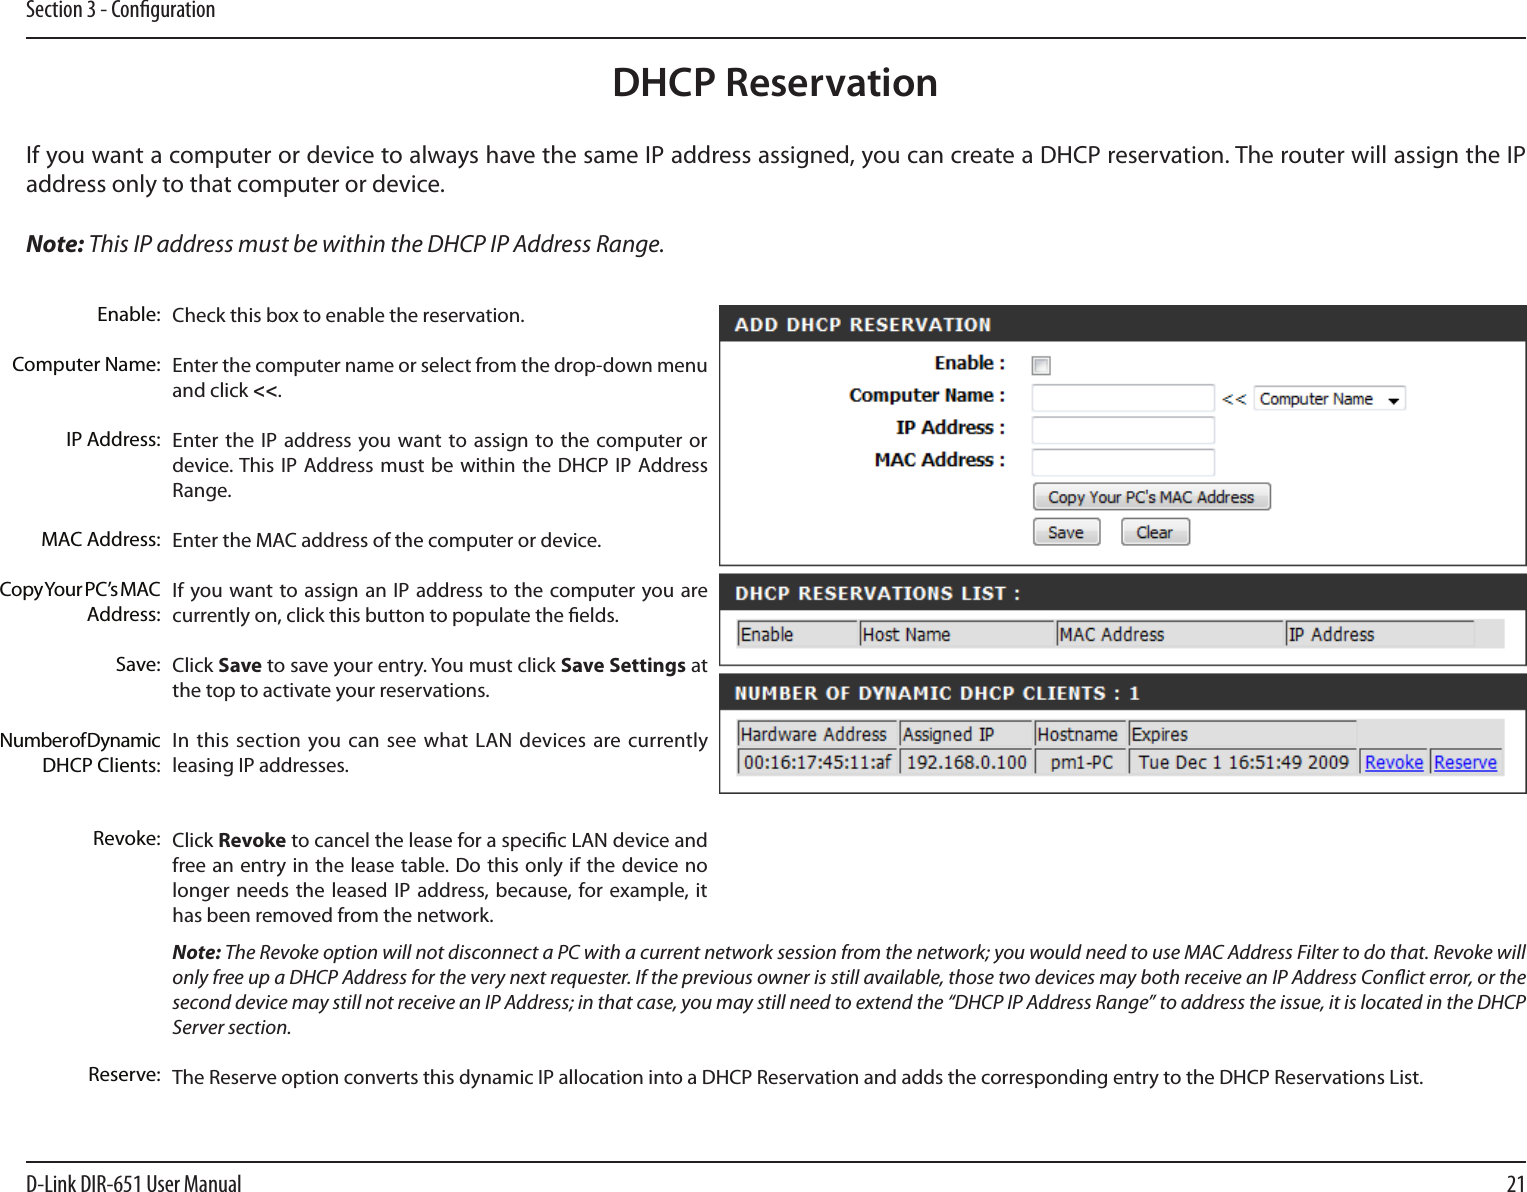 21D-Link DIR-651 User ManualSection 3 - CongurationDHCP ReservationIf you want a computer or device to always have the same IP address assigned, you can create a DHCP reservation. The router will assign the IP address only to that computer or device. Note: This IP address must be within the DHCP IP Address Range.Check this box to enable the reservation.Enter the computer name or select from the drop-down menu and click &lt;&lt;.Enter the IP address  you want to assign to the  computer or device. This  IP Address must be  within the DHCP  IP  Address Range.Enter the MAC address of the computer or device.If you want to assign  an IP  address to the computer you are currently on, click this button to populate the elds. Click Save to save your entry. You must click Save Settings at the top to activate your reservations. In this section you can see what  LAN  devices are currently leasing IP addresses.Click Revoke to cancel the lease for a specic LAN device and free an entry in the lease table. Do this only if the device no longer needs  the  leased IP address, because, for example, it has been removed from the network.Note: The Revoke option will not disconnect a PC with a current network session from the network; you would need to use MAC Address Filter to do that. Revoke will only free up a DHCP Address for the very next requester. If the previous owner is still available, those two devices may both receive an IP Address Conict error, or the second device may still not receive an IP Address; in that case, you may still need to extend the “DHCP IP Address Range” to address the issue, it is located in the DHCP Server section.  The Reserve option converts this dynamic IP allocation into a DHCP Reservation and adds the corresponding entry to the DHCP Reservations List.Enable:Computer Name:IP Address:MAC Address:Copy Your PC’s MAC Address:Save:Number of Dynamic DHCP Clients:Revoke:Reserve: